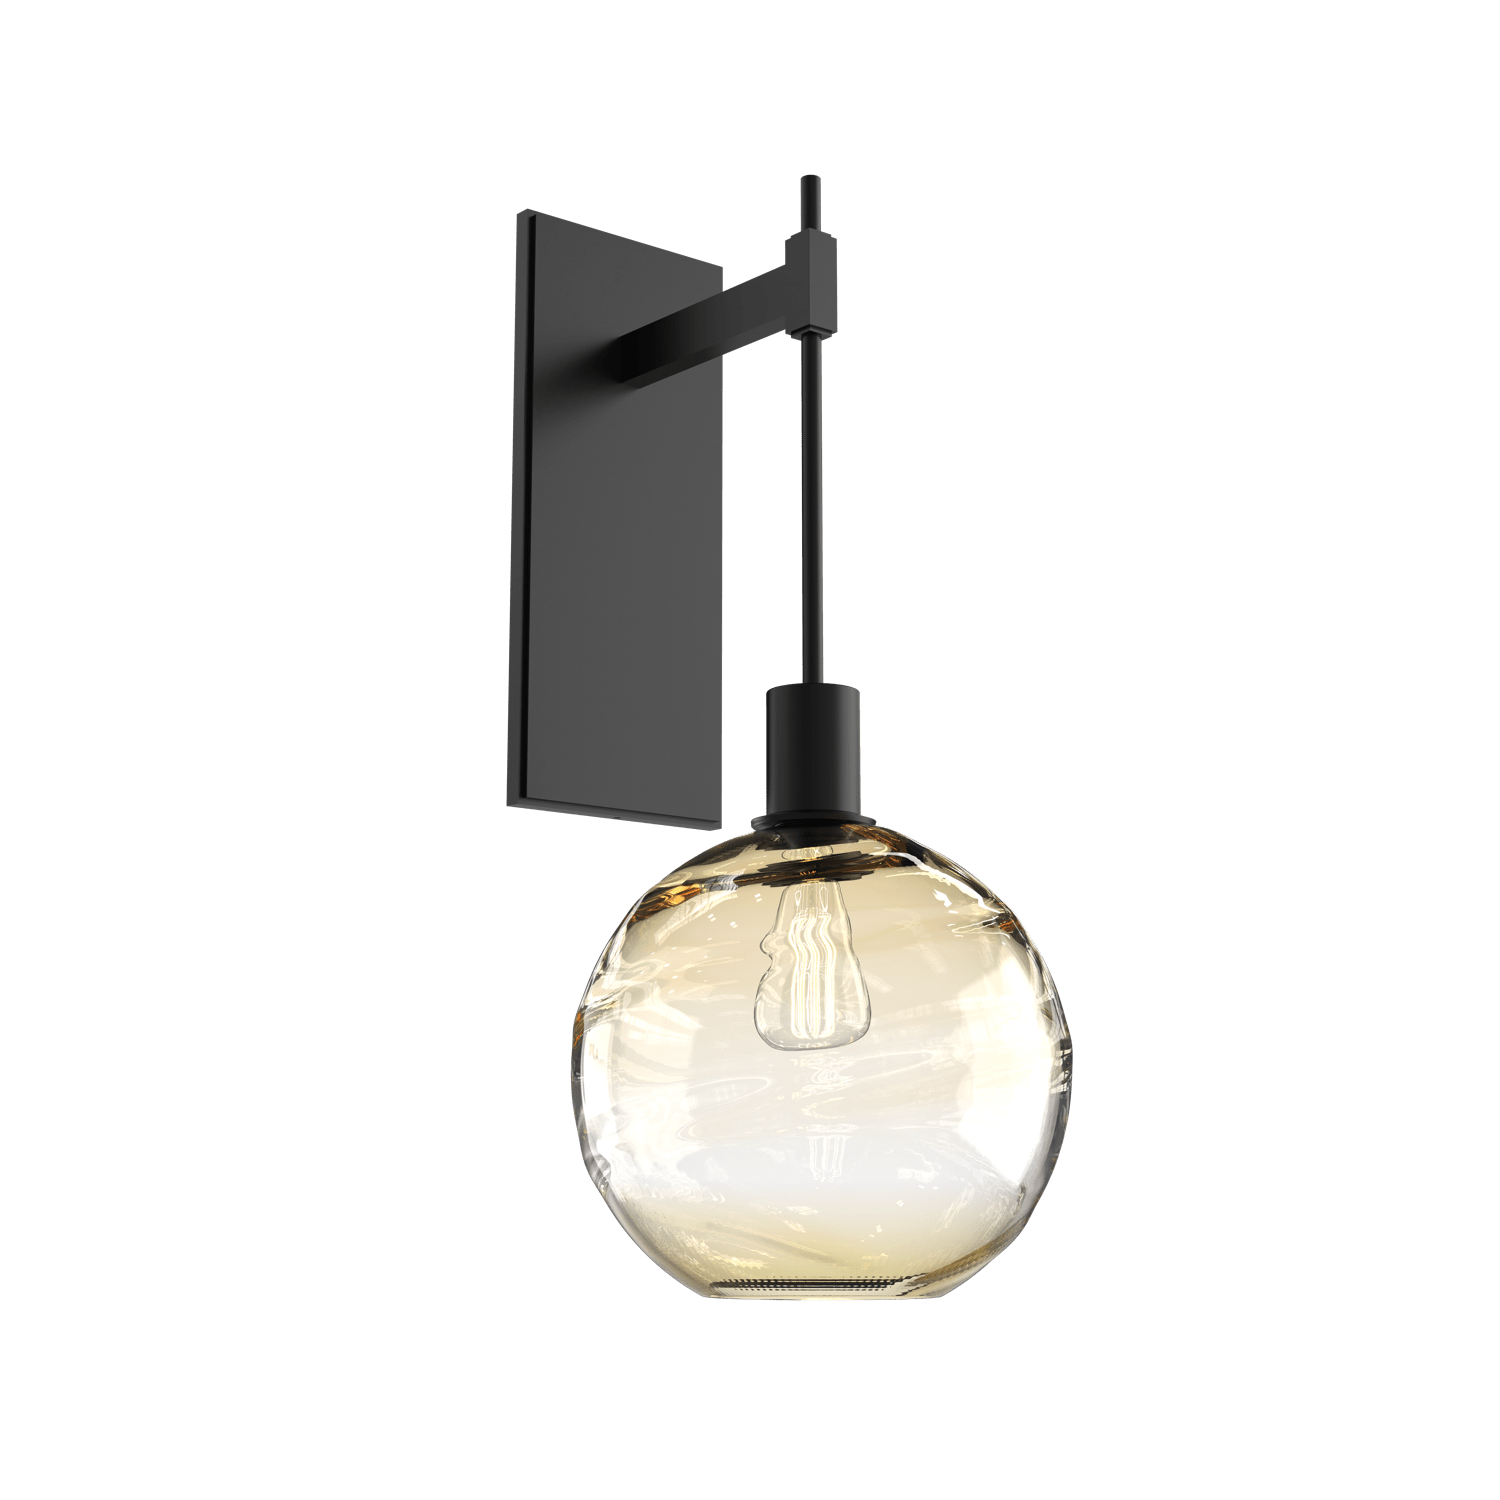 IDB0047-22-MB-OA-Hammerton-Studio-Optic-Blown-Glass-Terra-tempo-wall-sconce-with-matte-black-finish-and-optic-amber-blown-glass-shades-and-incandescent-lamping